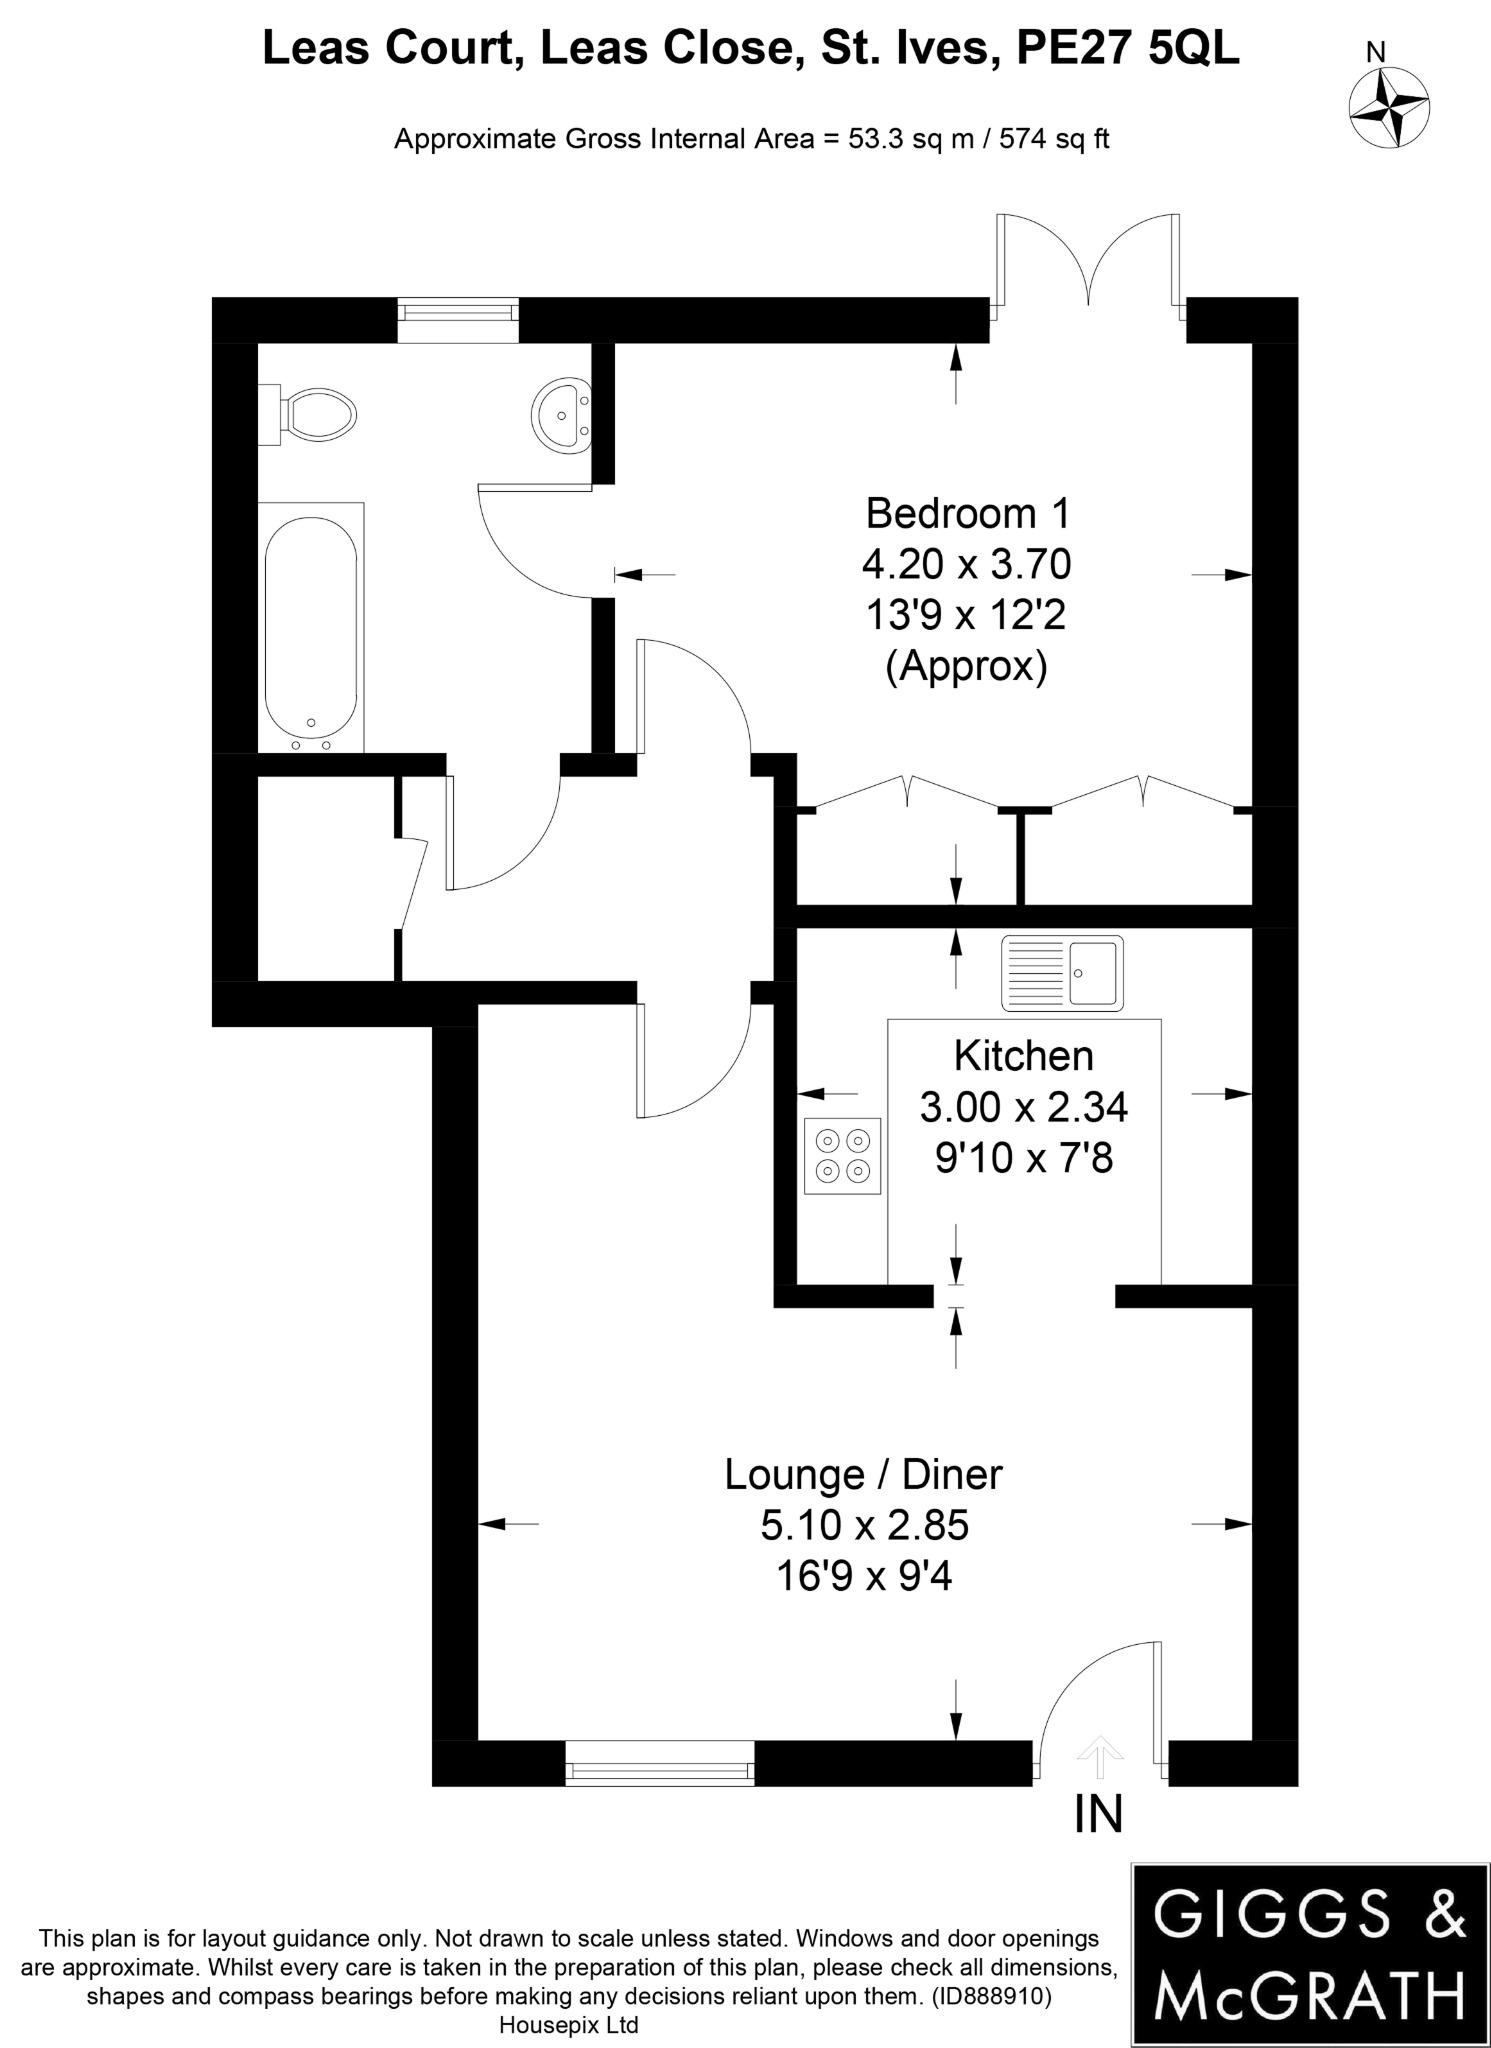 1 bed ground floor flat for sale in Leas Close, St Ives - Property Floorplan